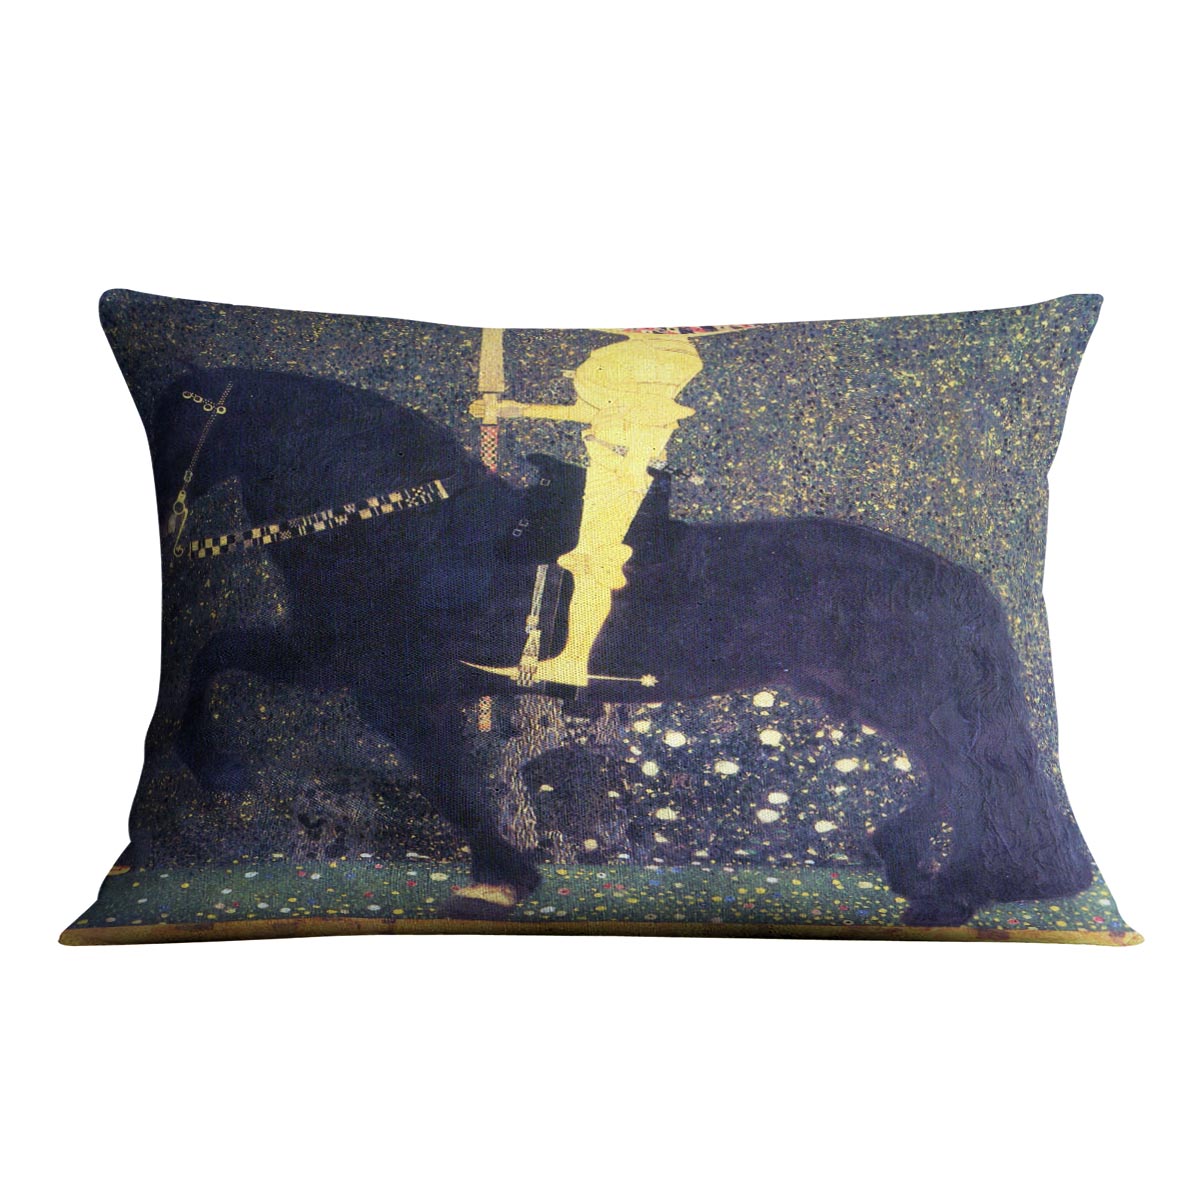 The life of a struggle The Golden Knights by Klimt Cushion